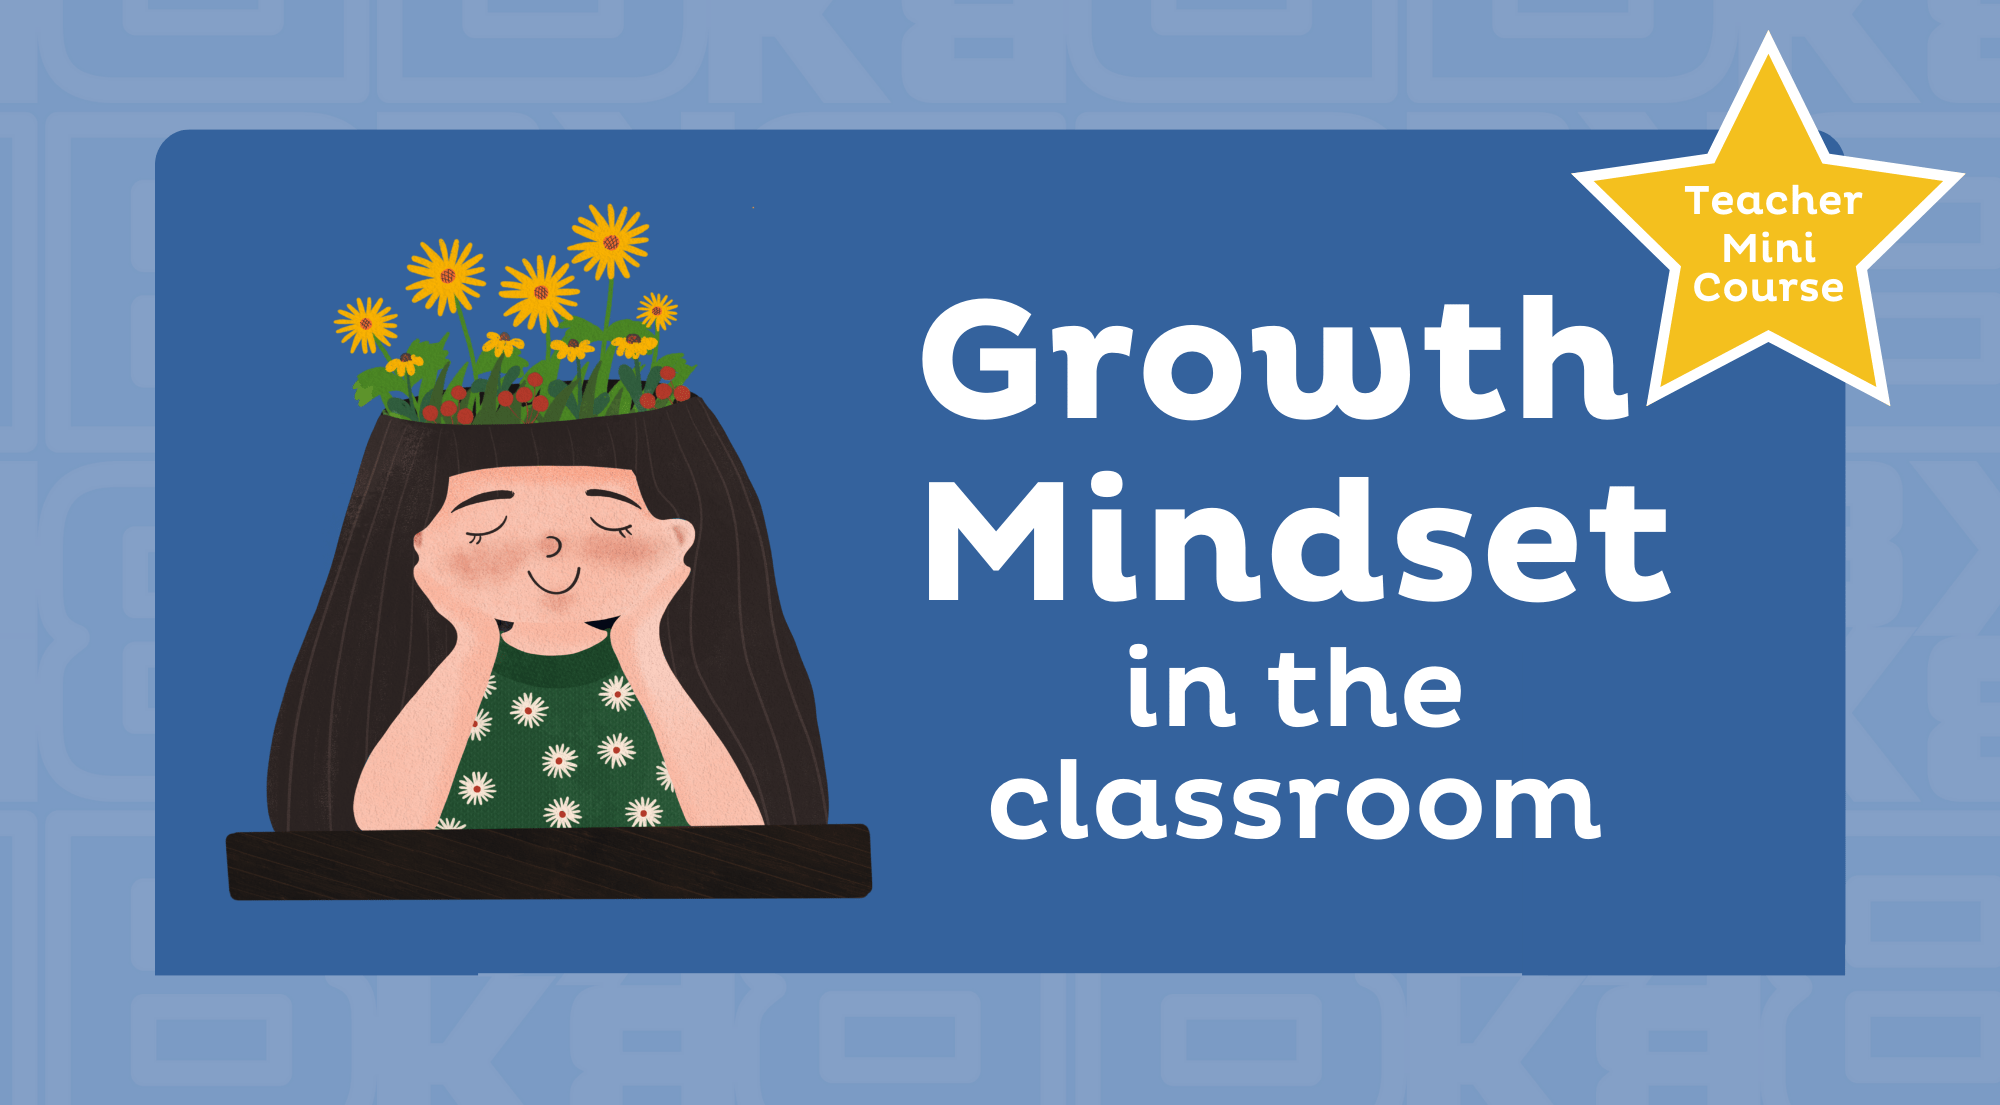 You are currently viewing Growth Mindset in the Classroom – Mini Course